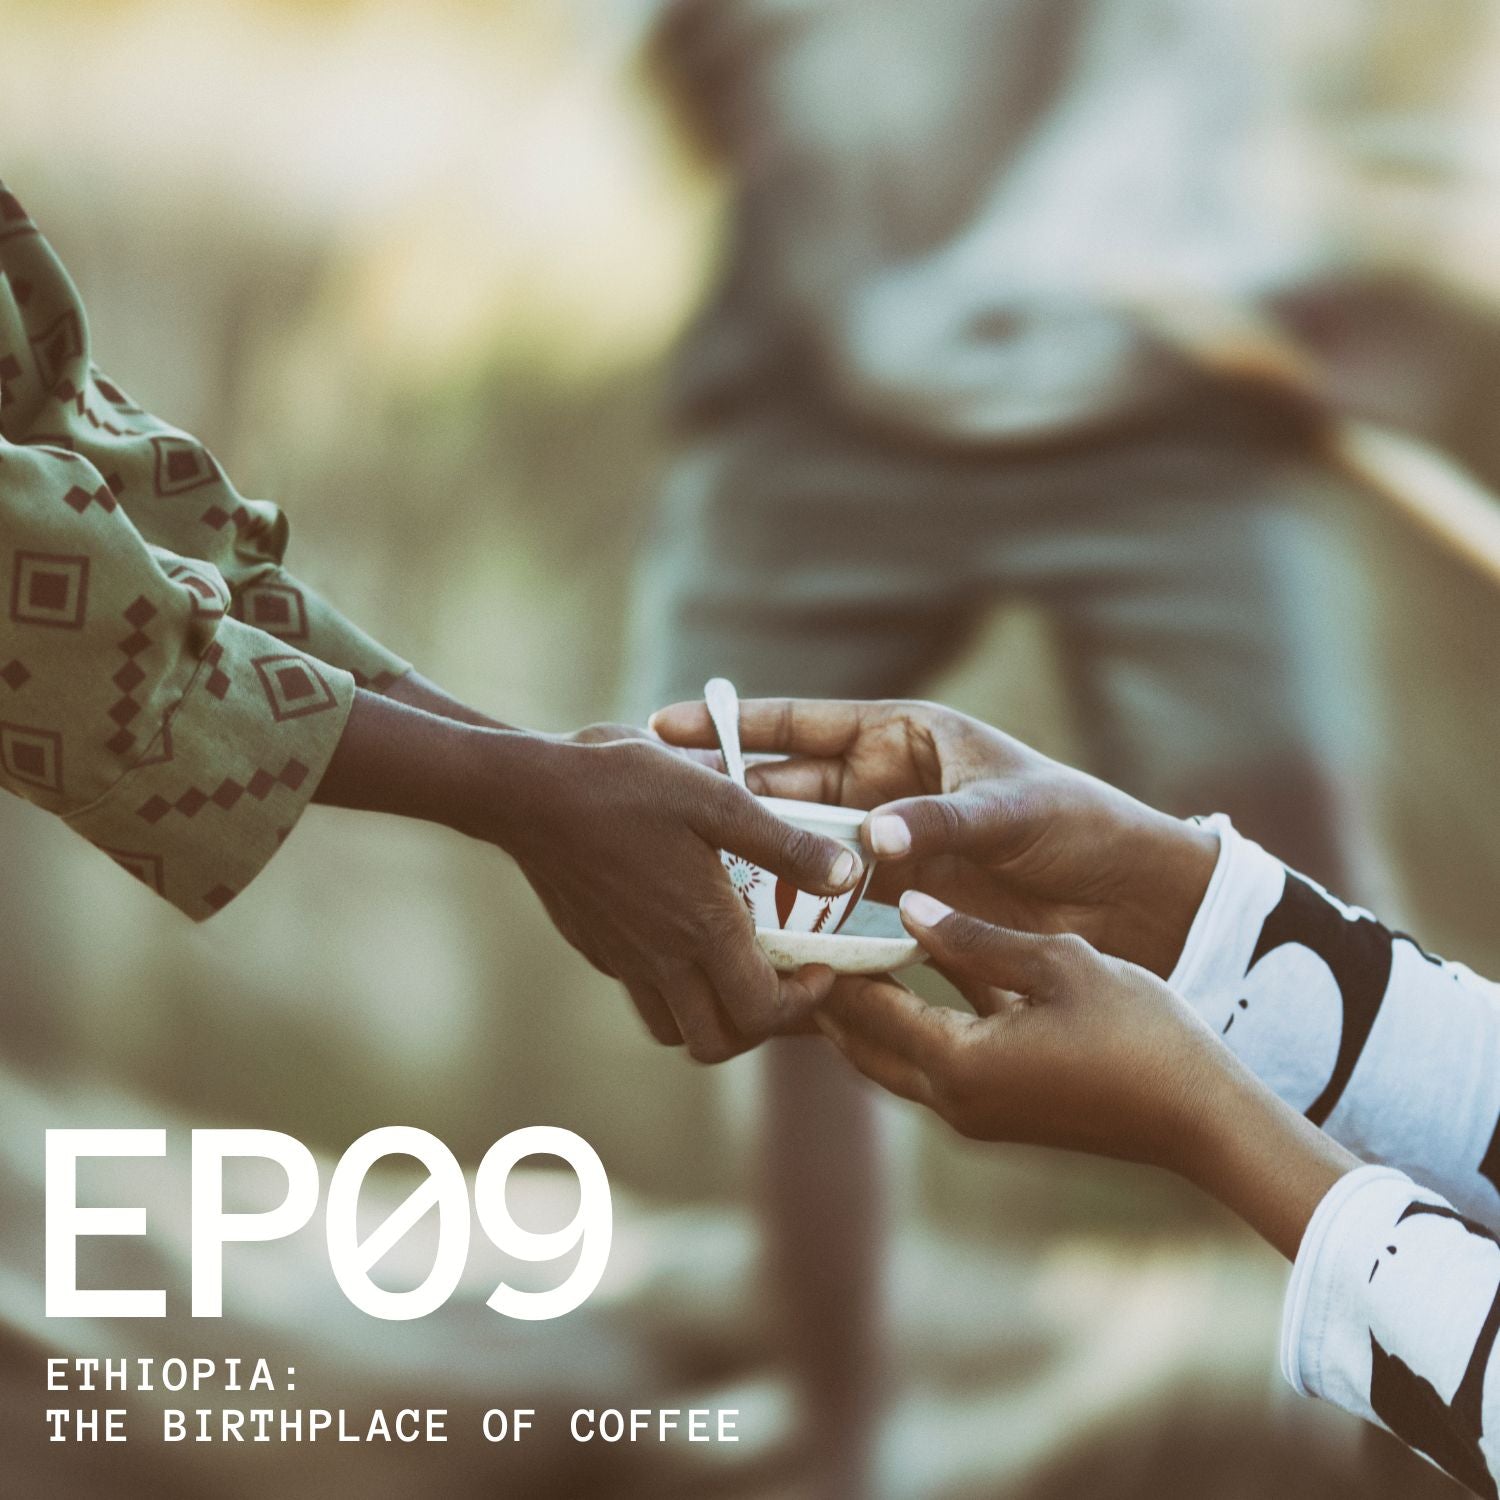 Episode 9 - Ethiopia: The Birthplace of Coffee